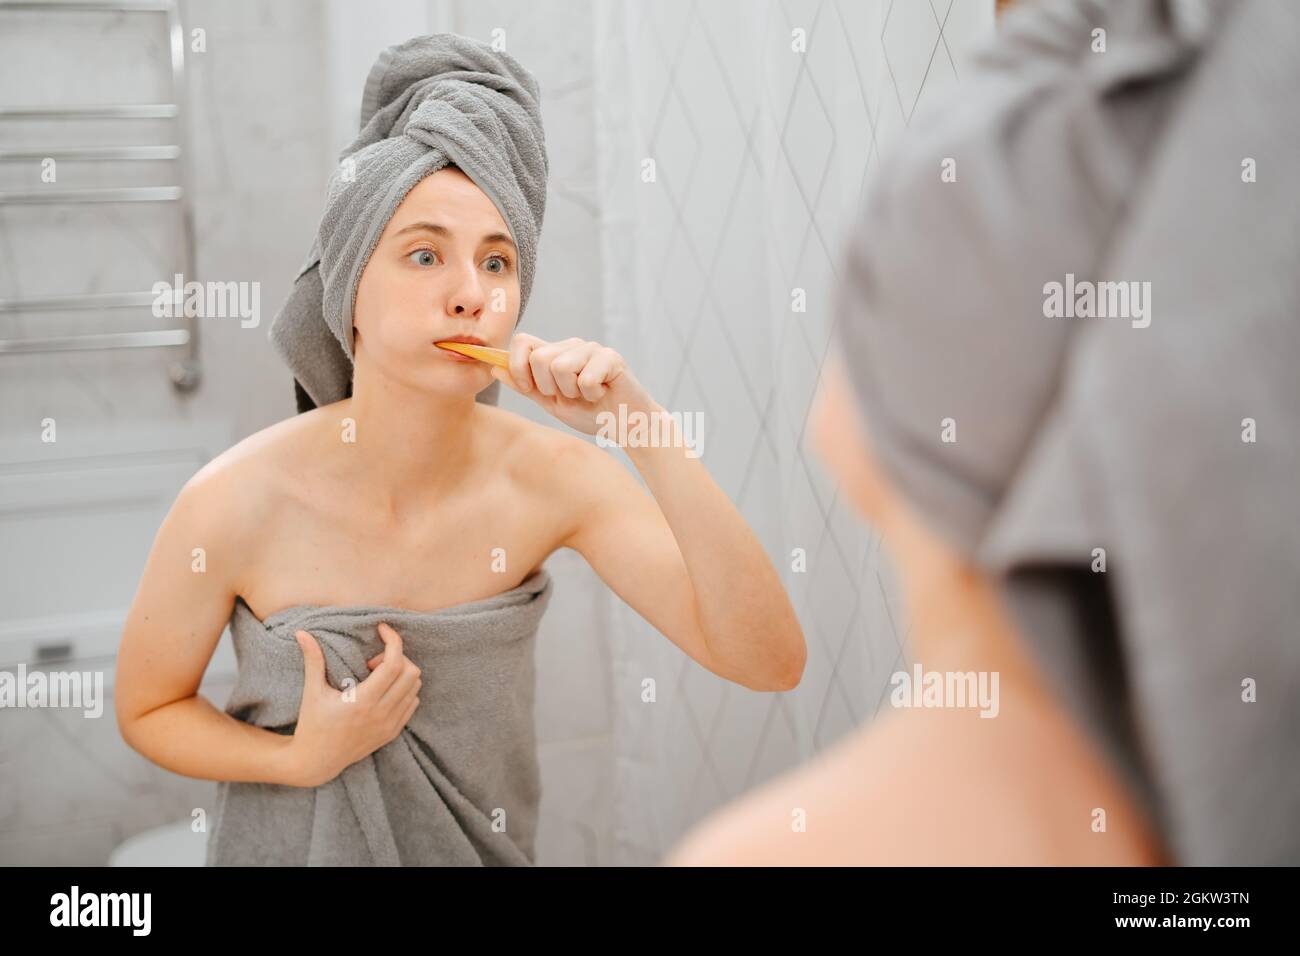 Woman In The Bathroom Brushes Her Teeth After A Shower In A Gray Towel